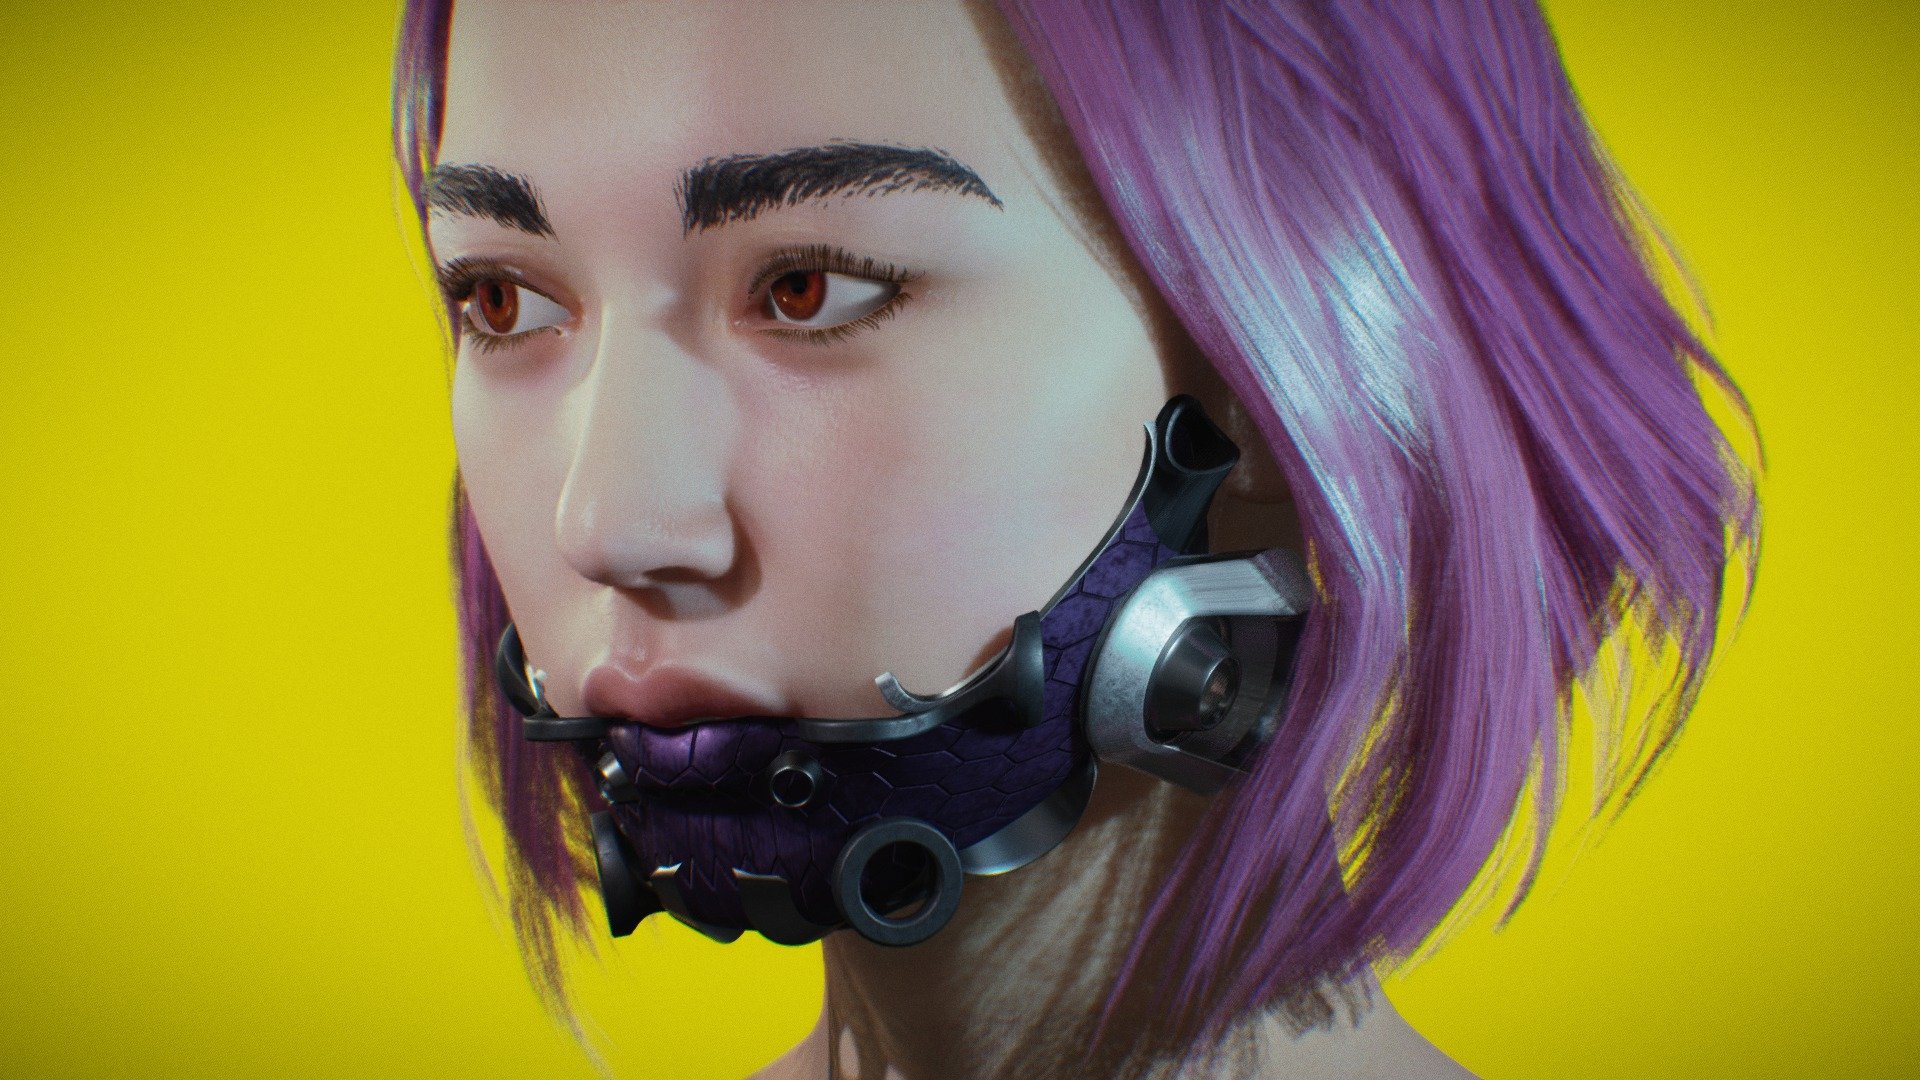 cyberpunk cybrog girl concept in blender. android head with basic animation loop. rigged face and eyes. Robotic jaw 3d model